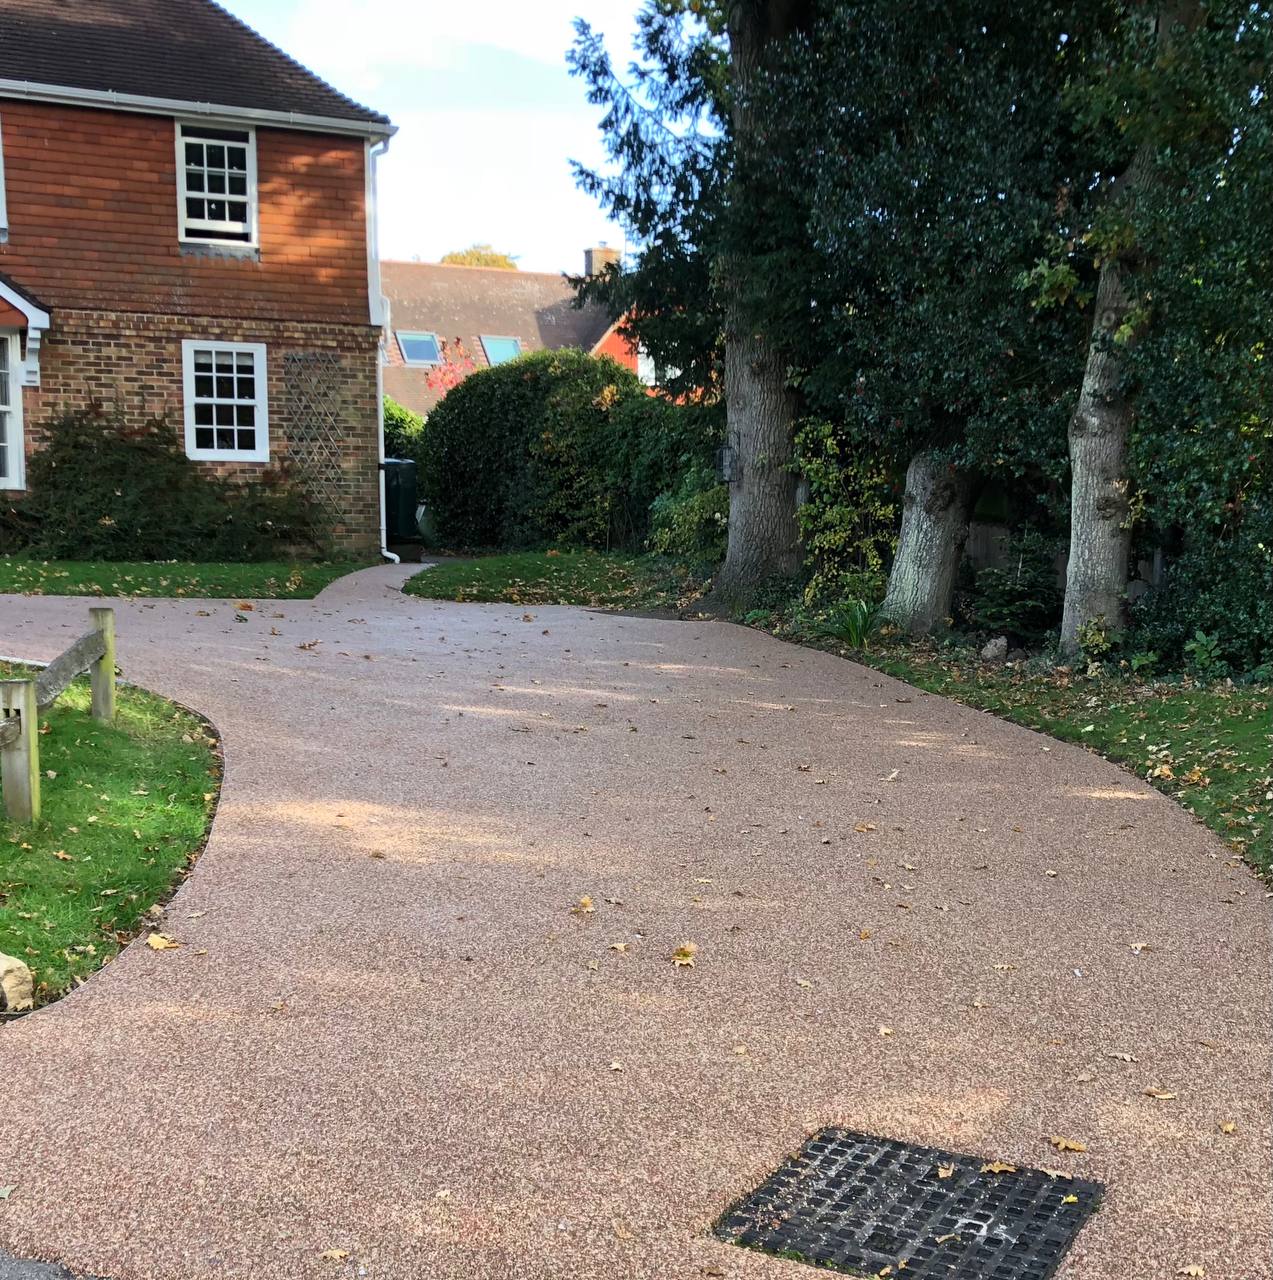 This is a photo of a Resin bound driveway carried out in a district of Chester. All works done by Chester Resin Driveways